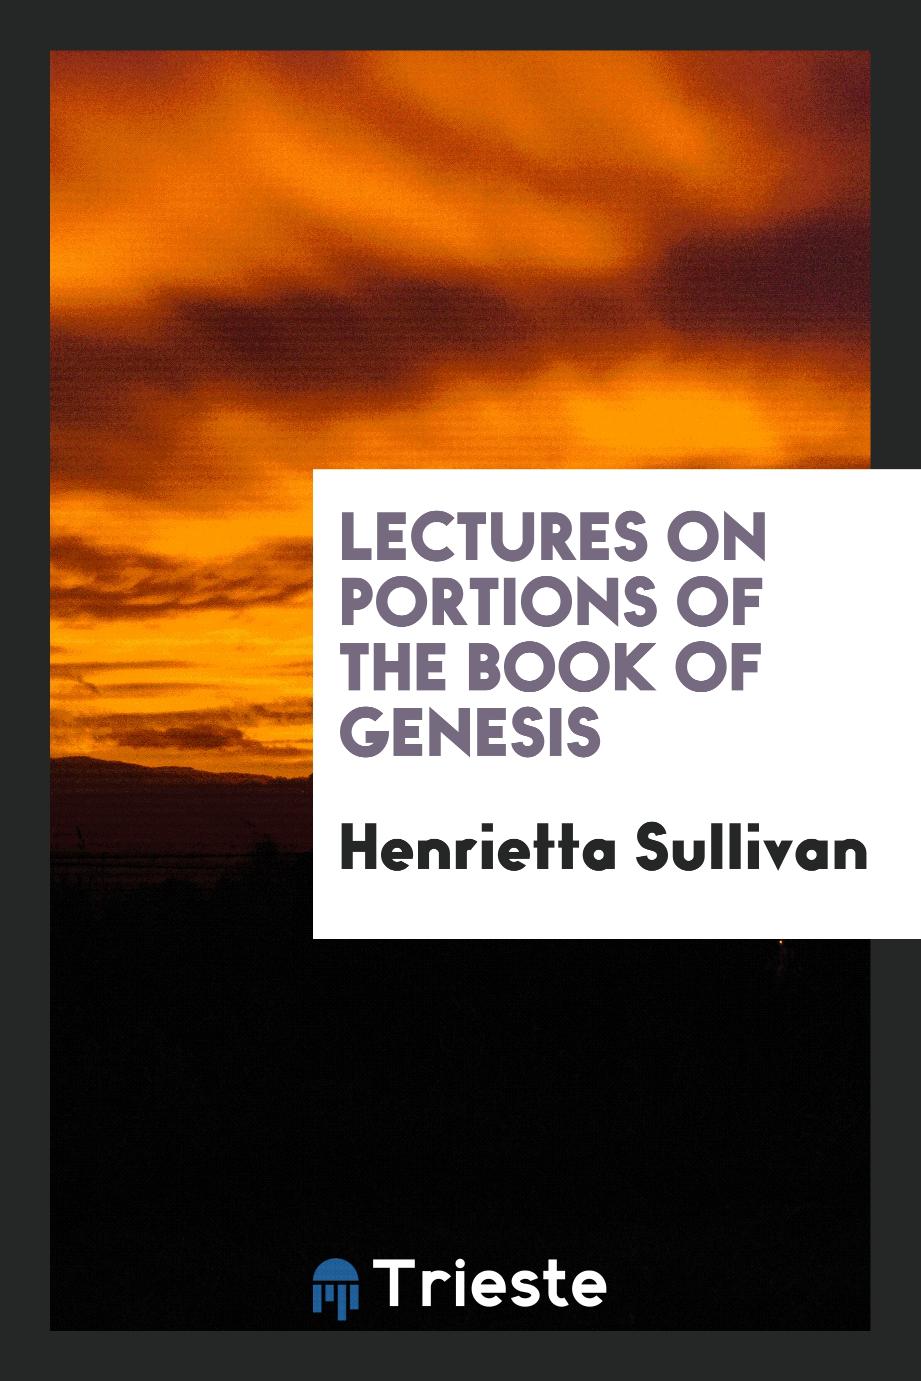 Lectures on Portions of the Book of Genesis